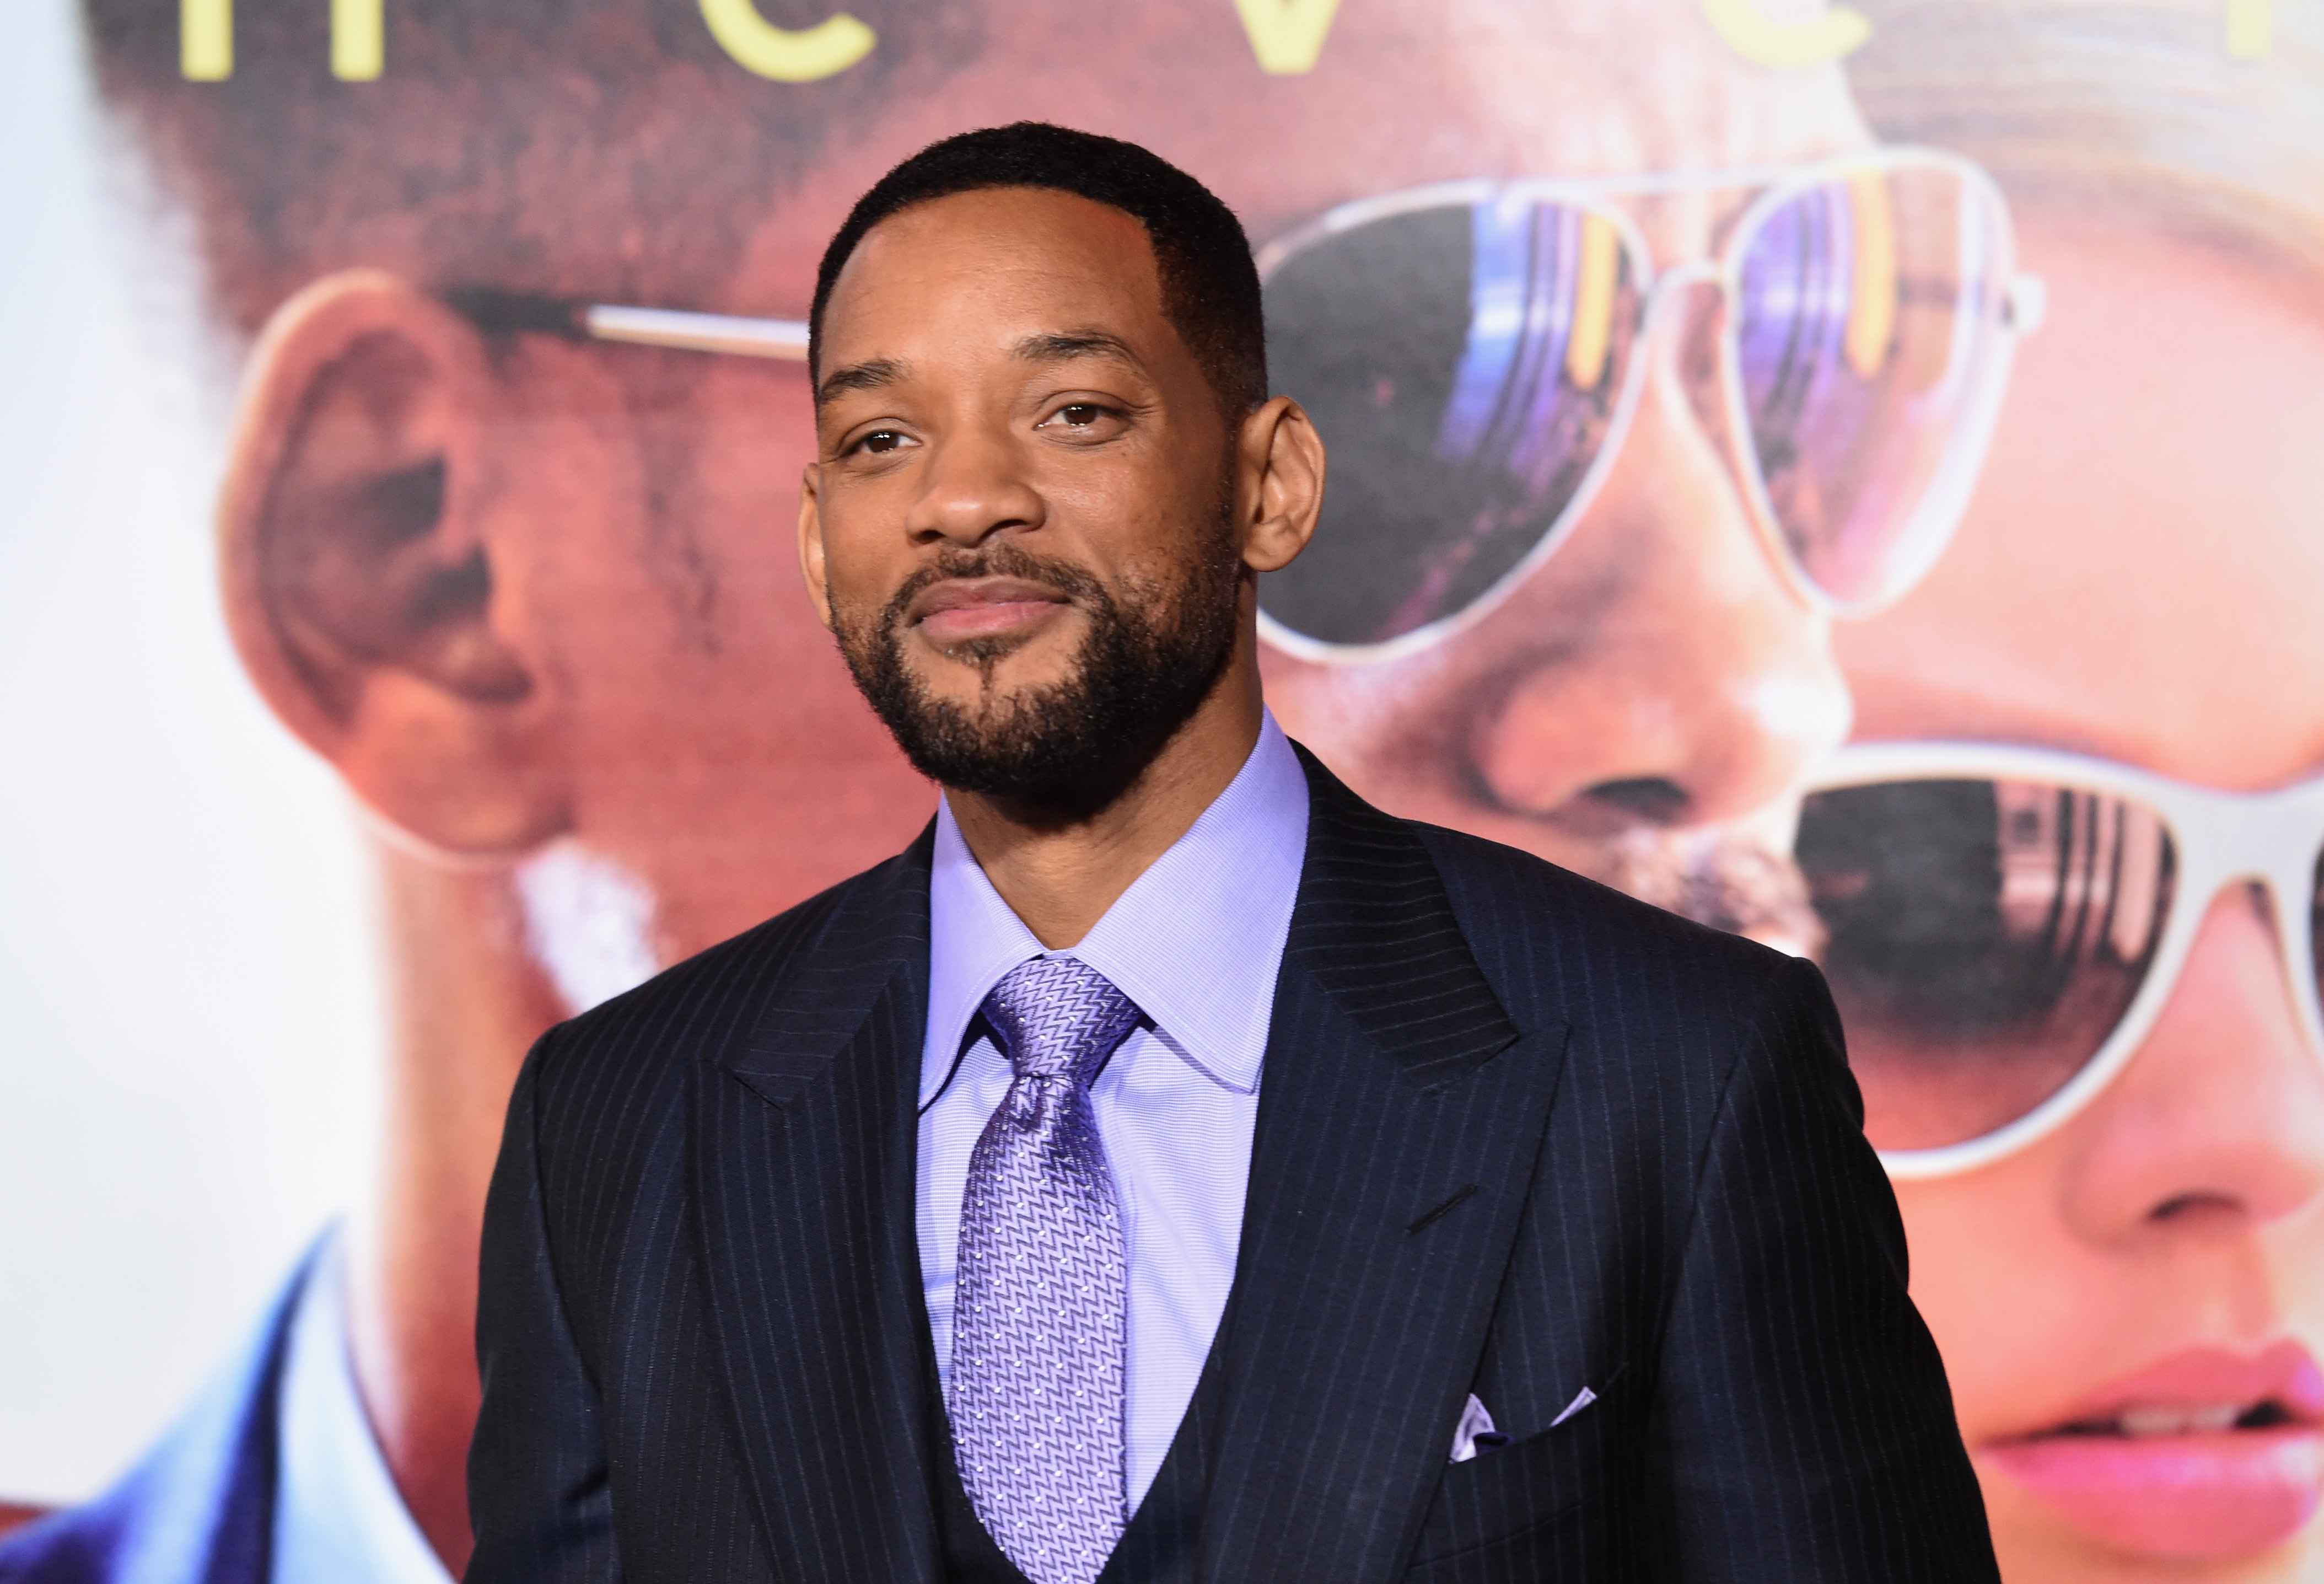 Will Smith appears at the premiere of 'Focus' in 2015